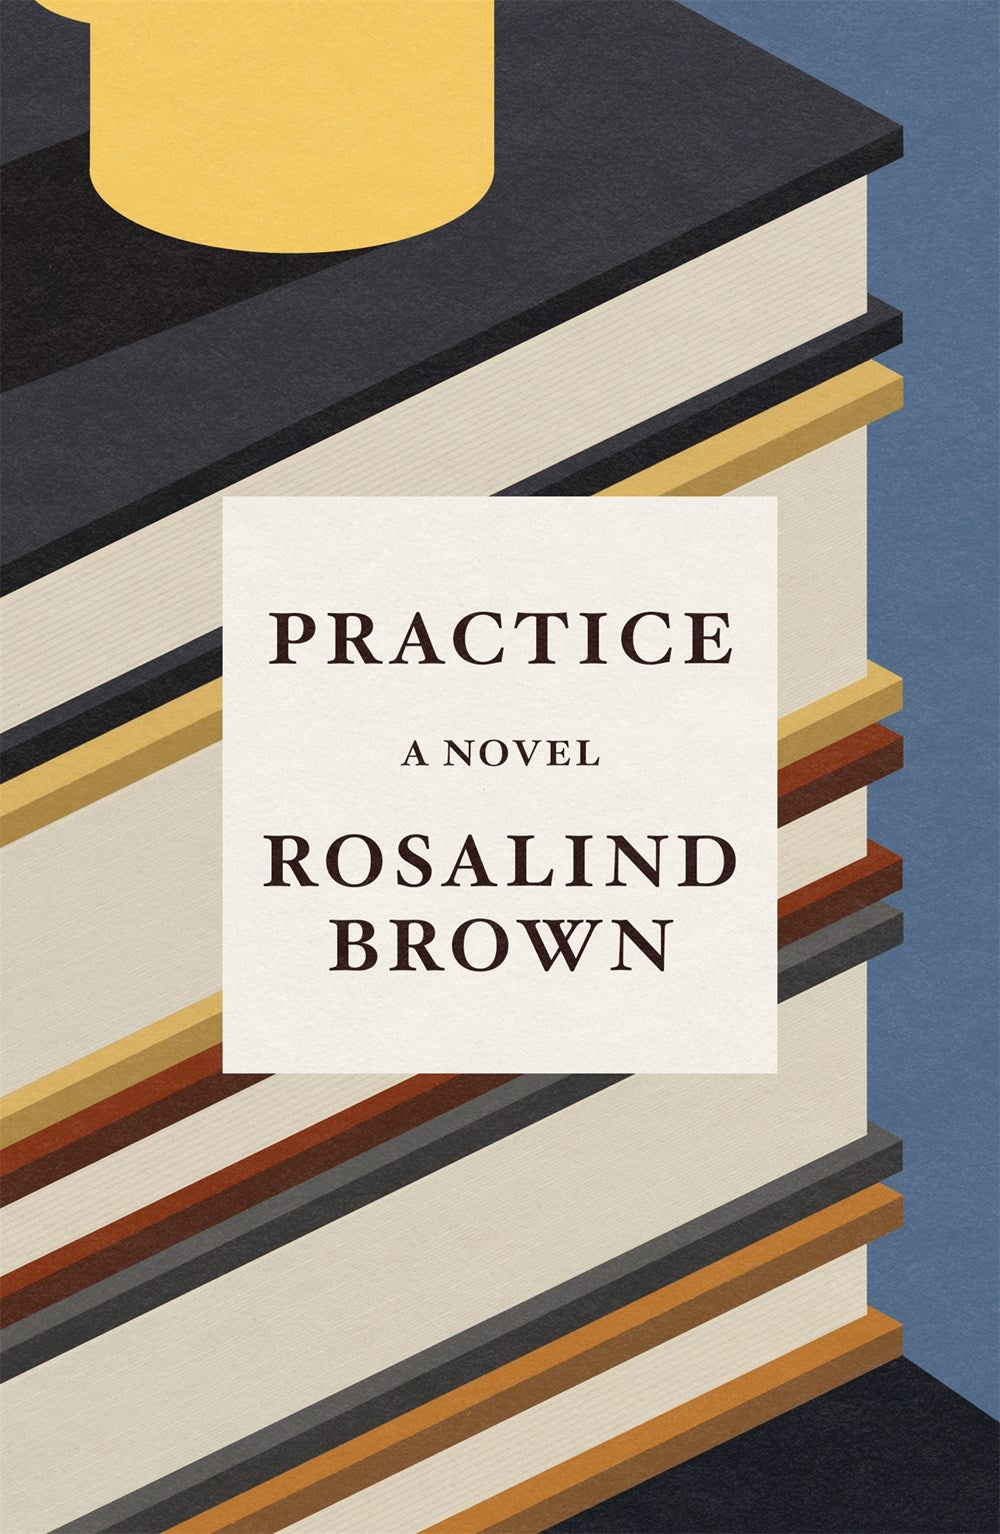 Practice: A Novel by Rosalind Brown (6/25/24)